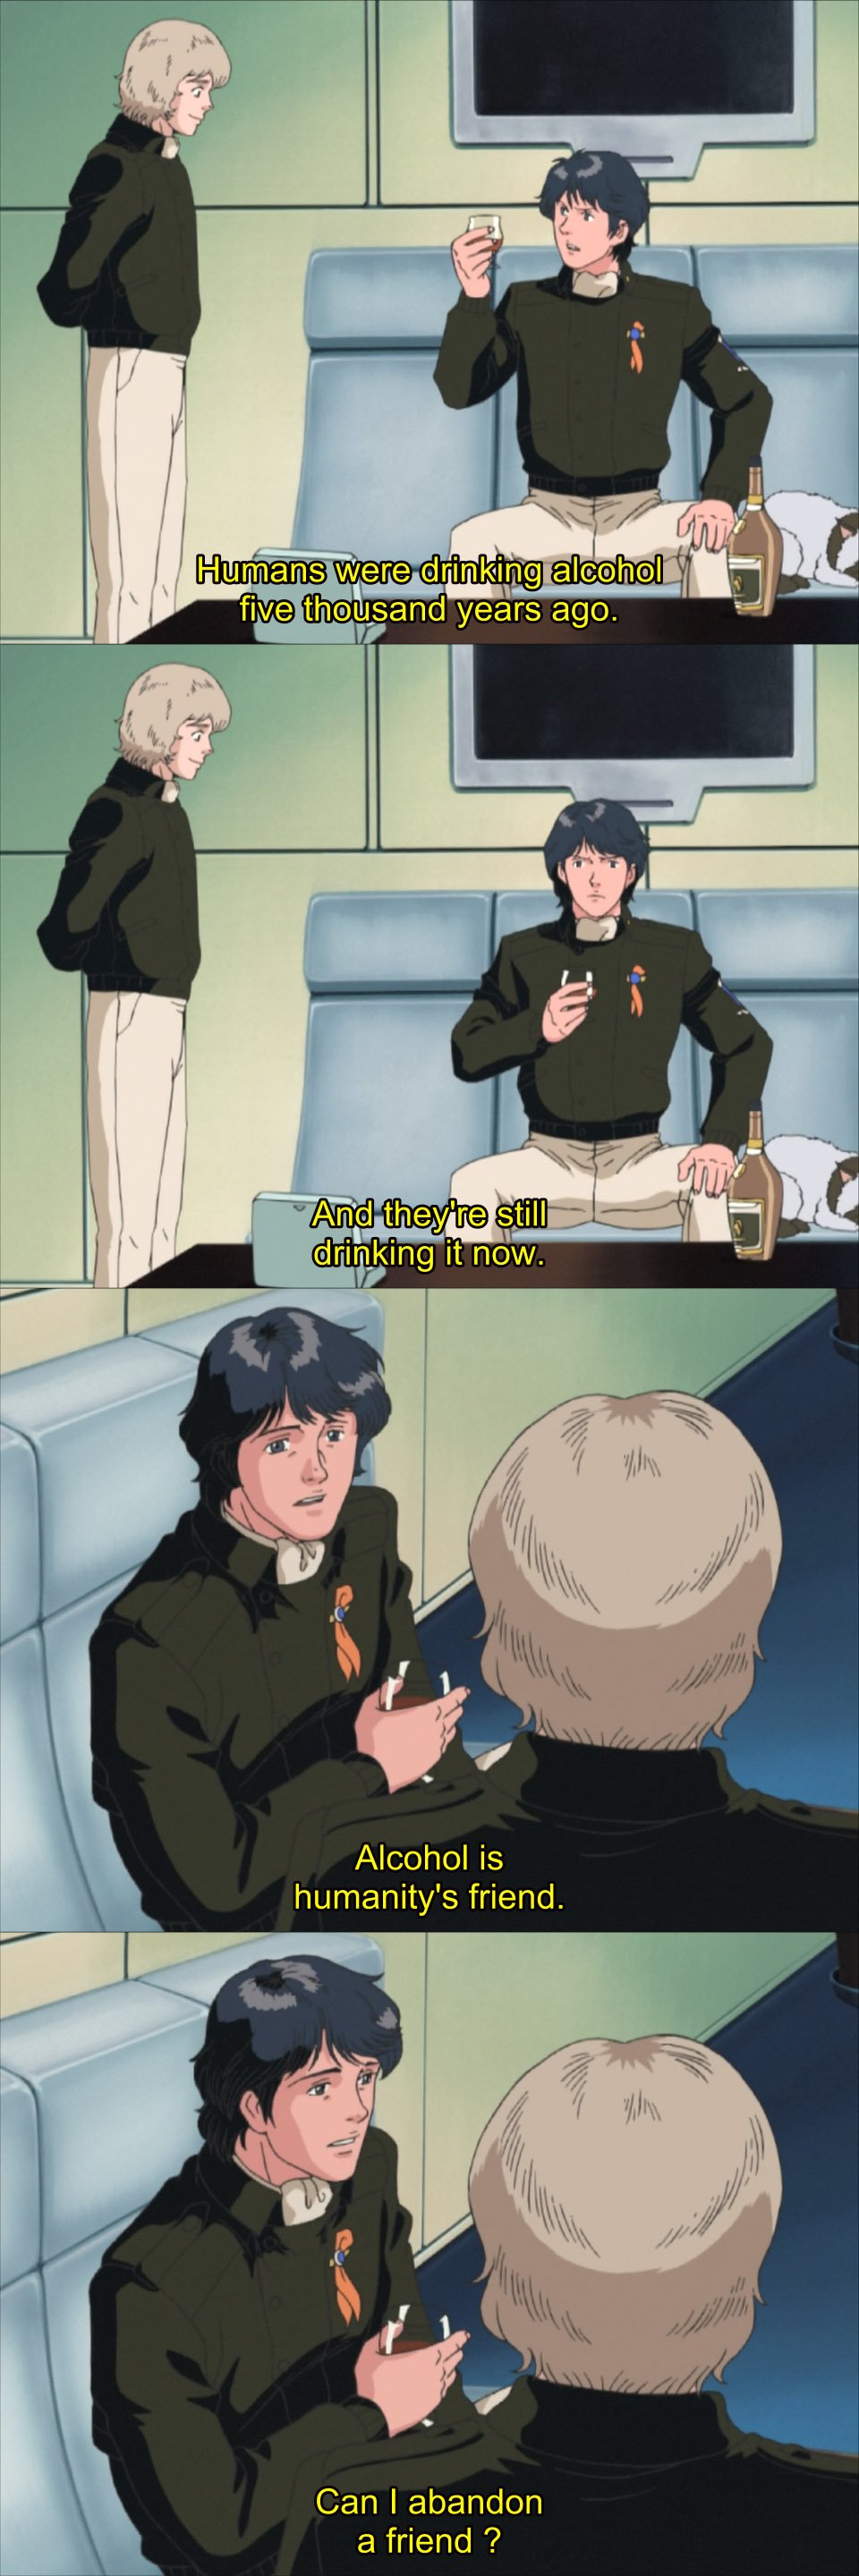 Yang Wenli's Insights on Alcohol